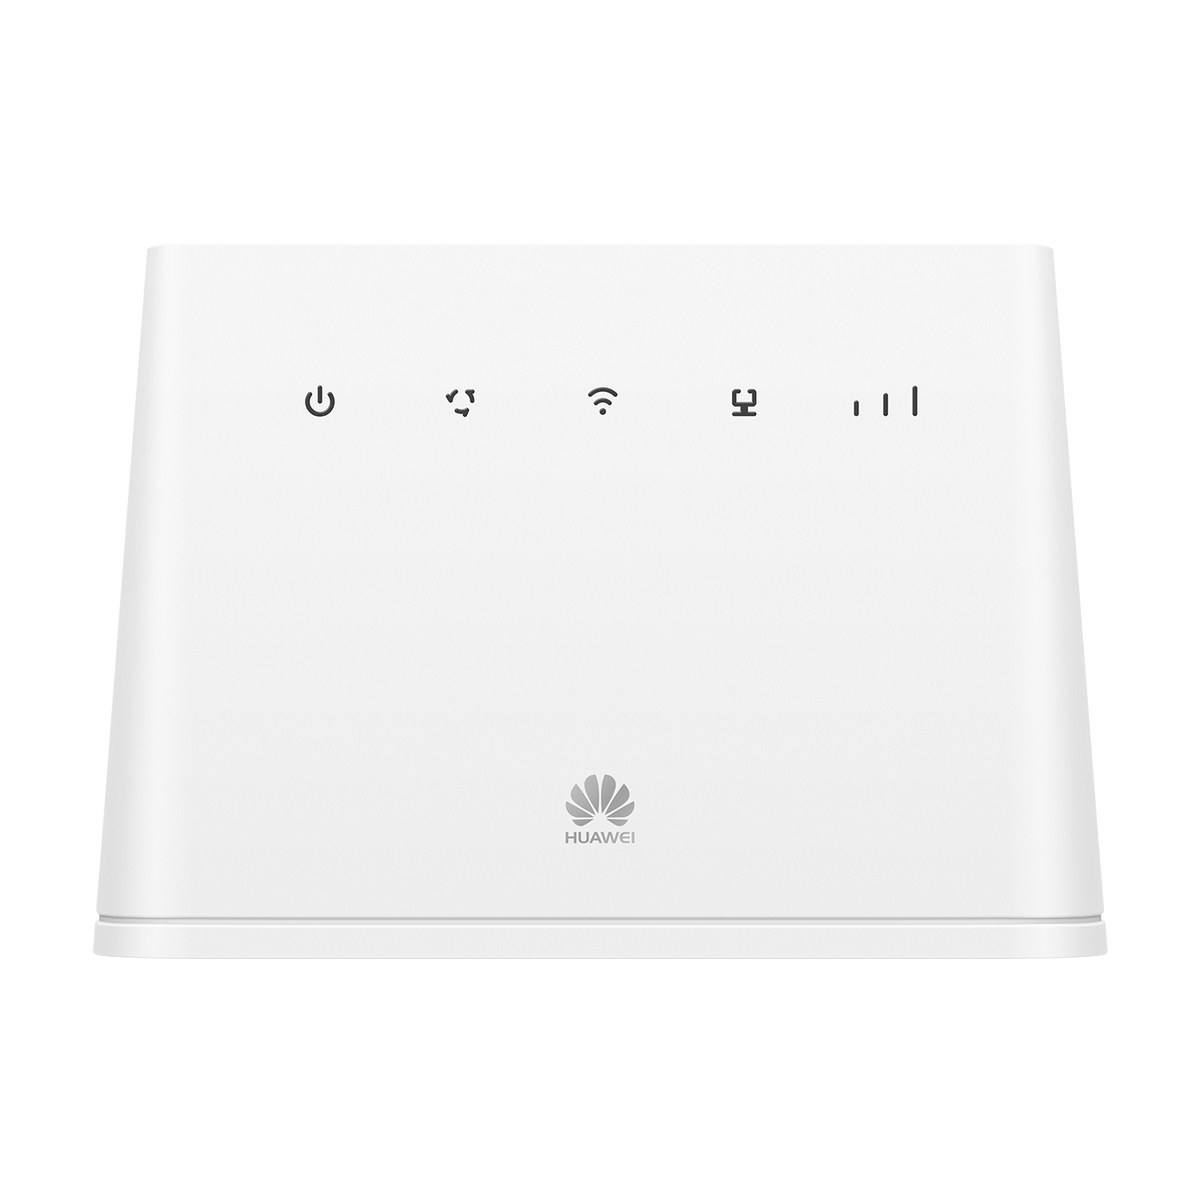 WHITE Mbit/s 4G CAT4 150MBPS HUAWEI B311S-221 STAT LTE DL ROUTER 150 Router